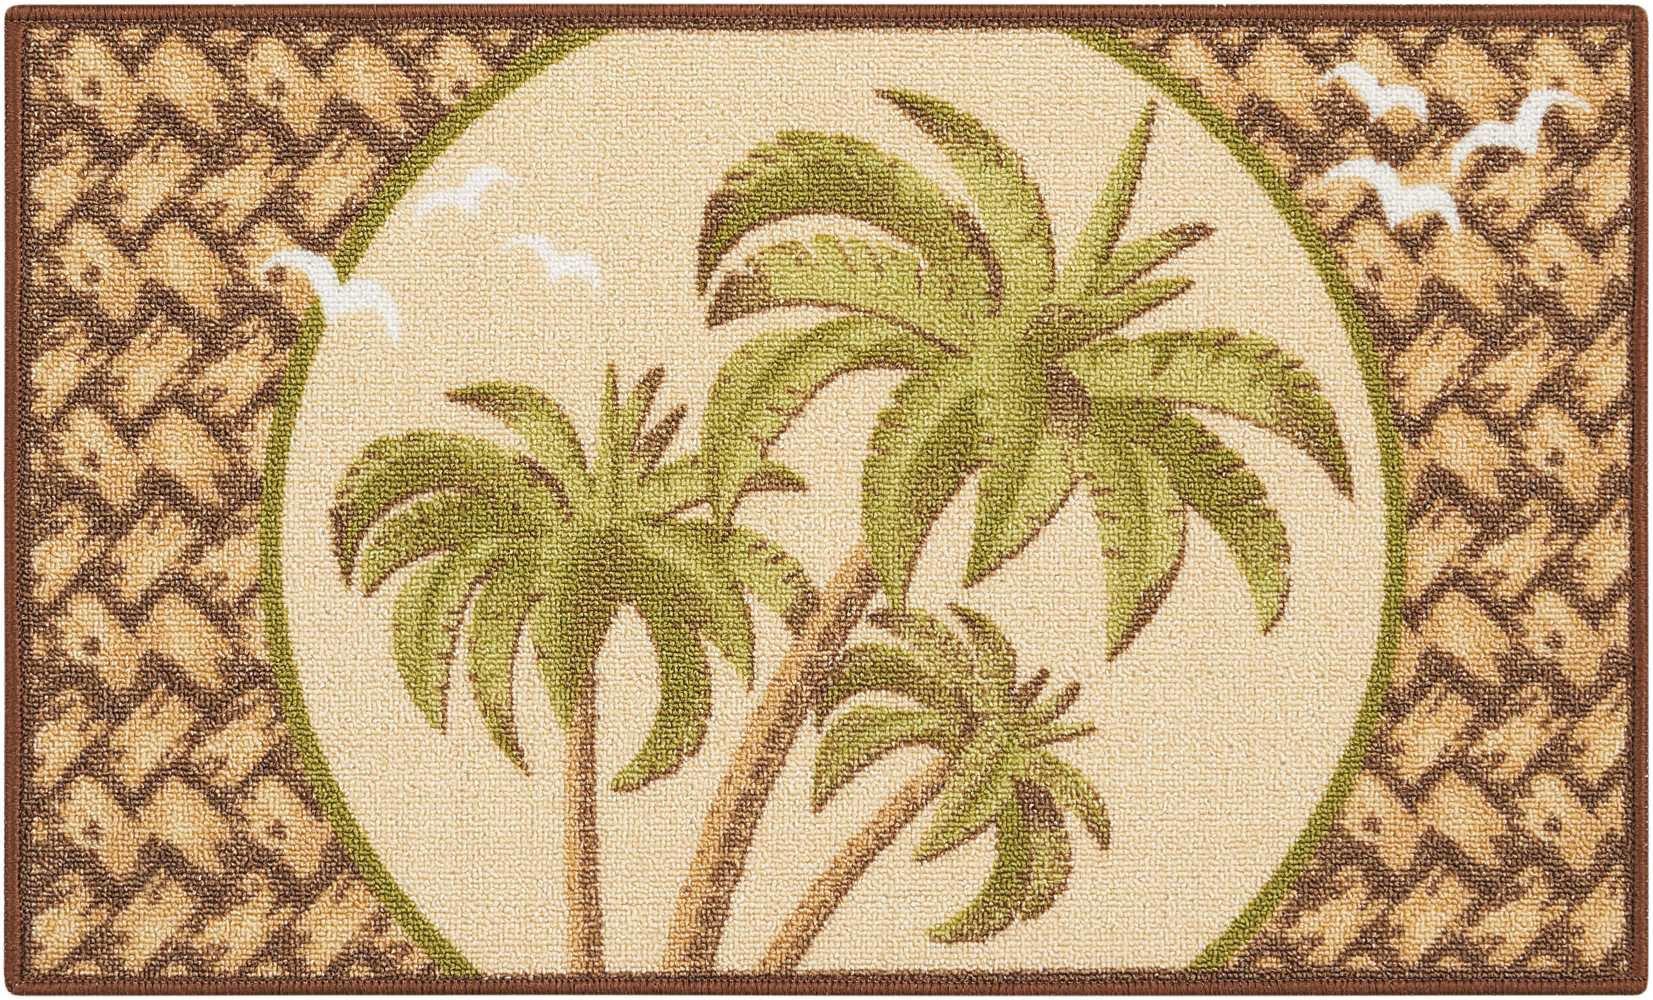 Essential Elements Triple Palm Trees Accent Rug